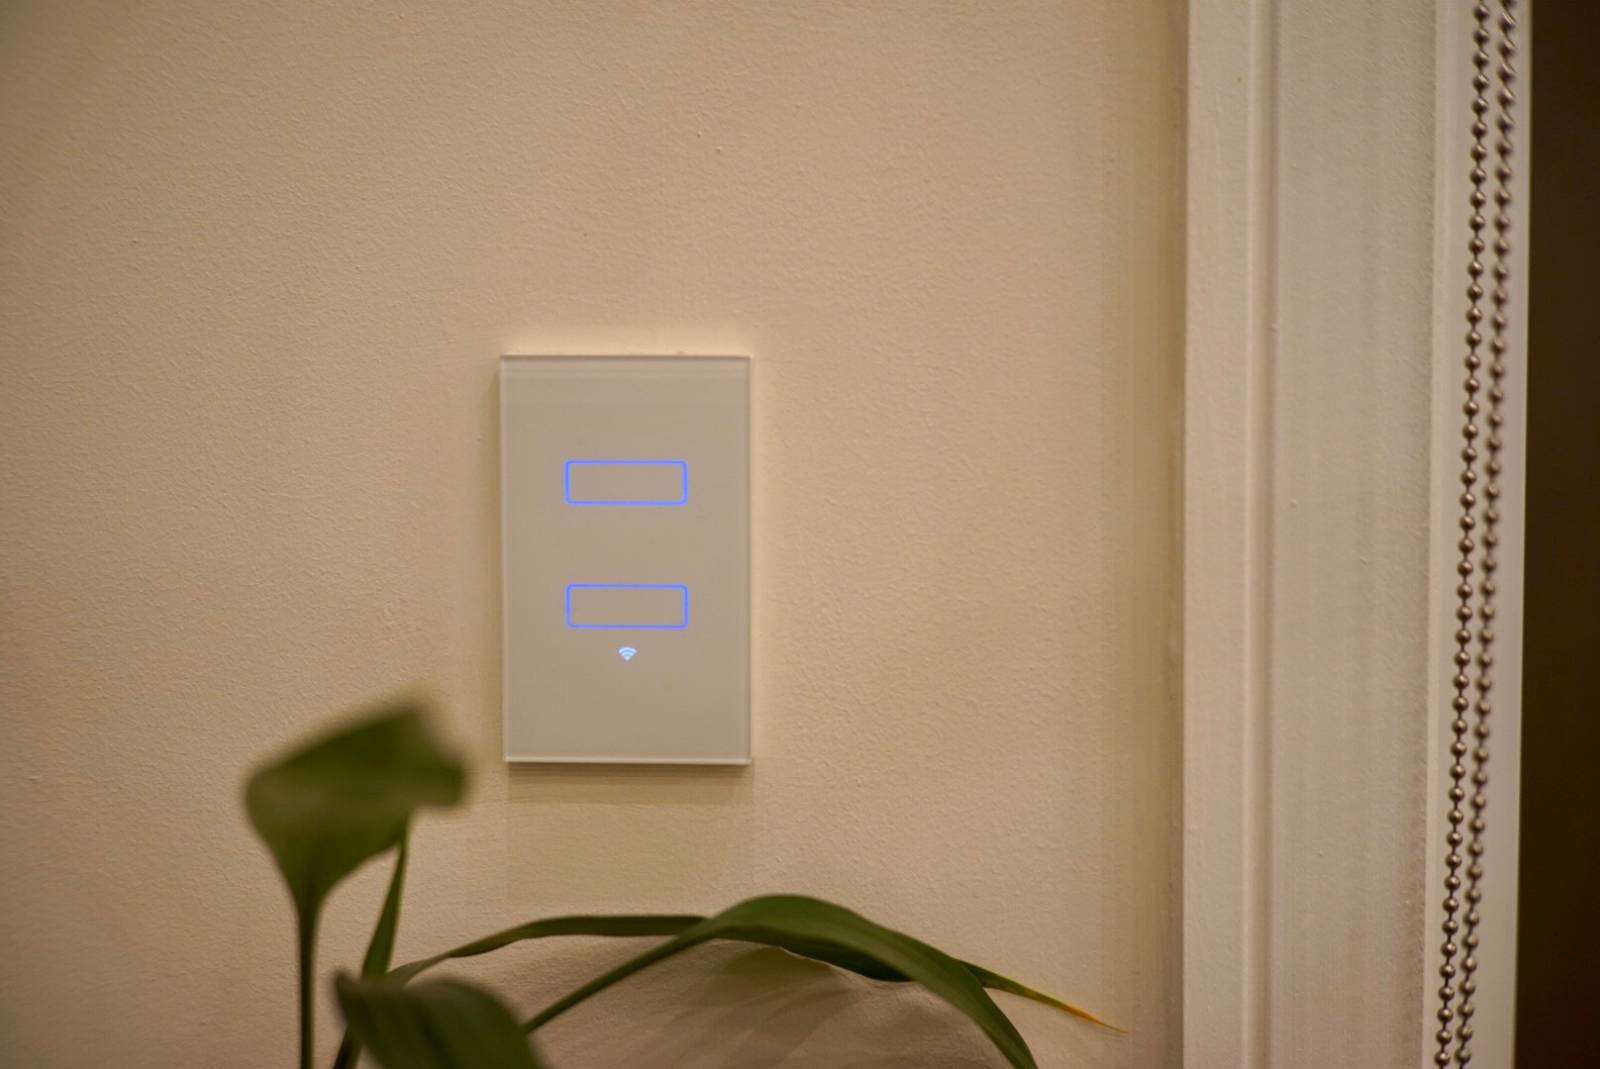 What are these GPO and smart light switch? ----installed !!!